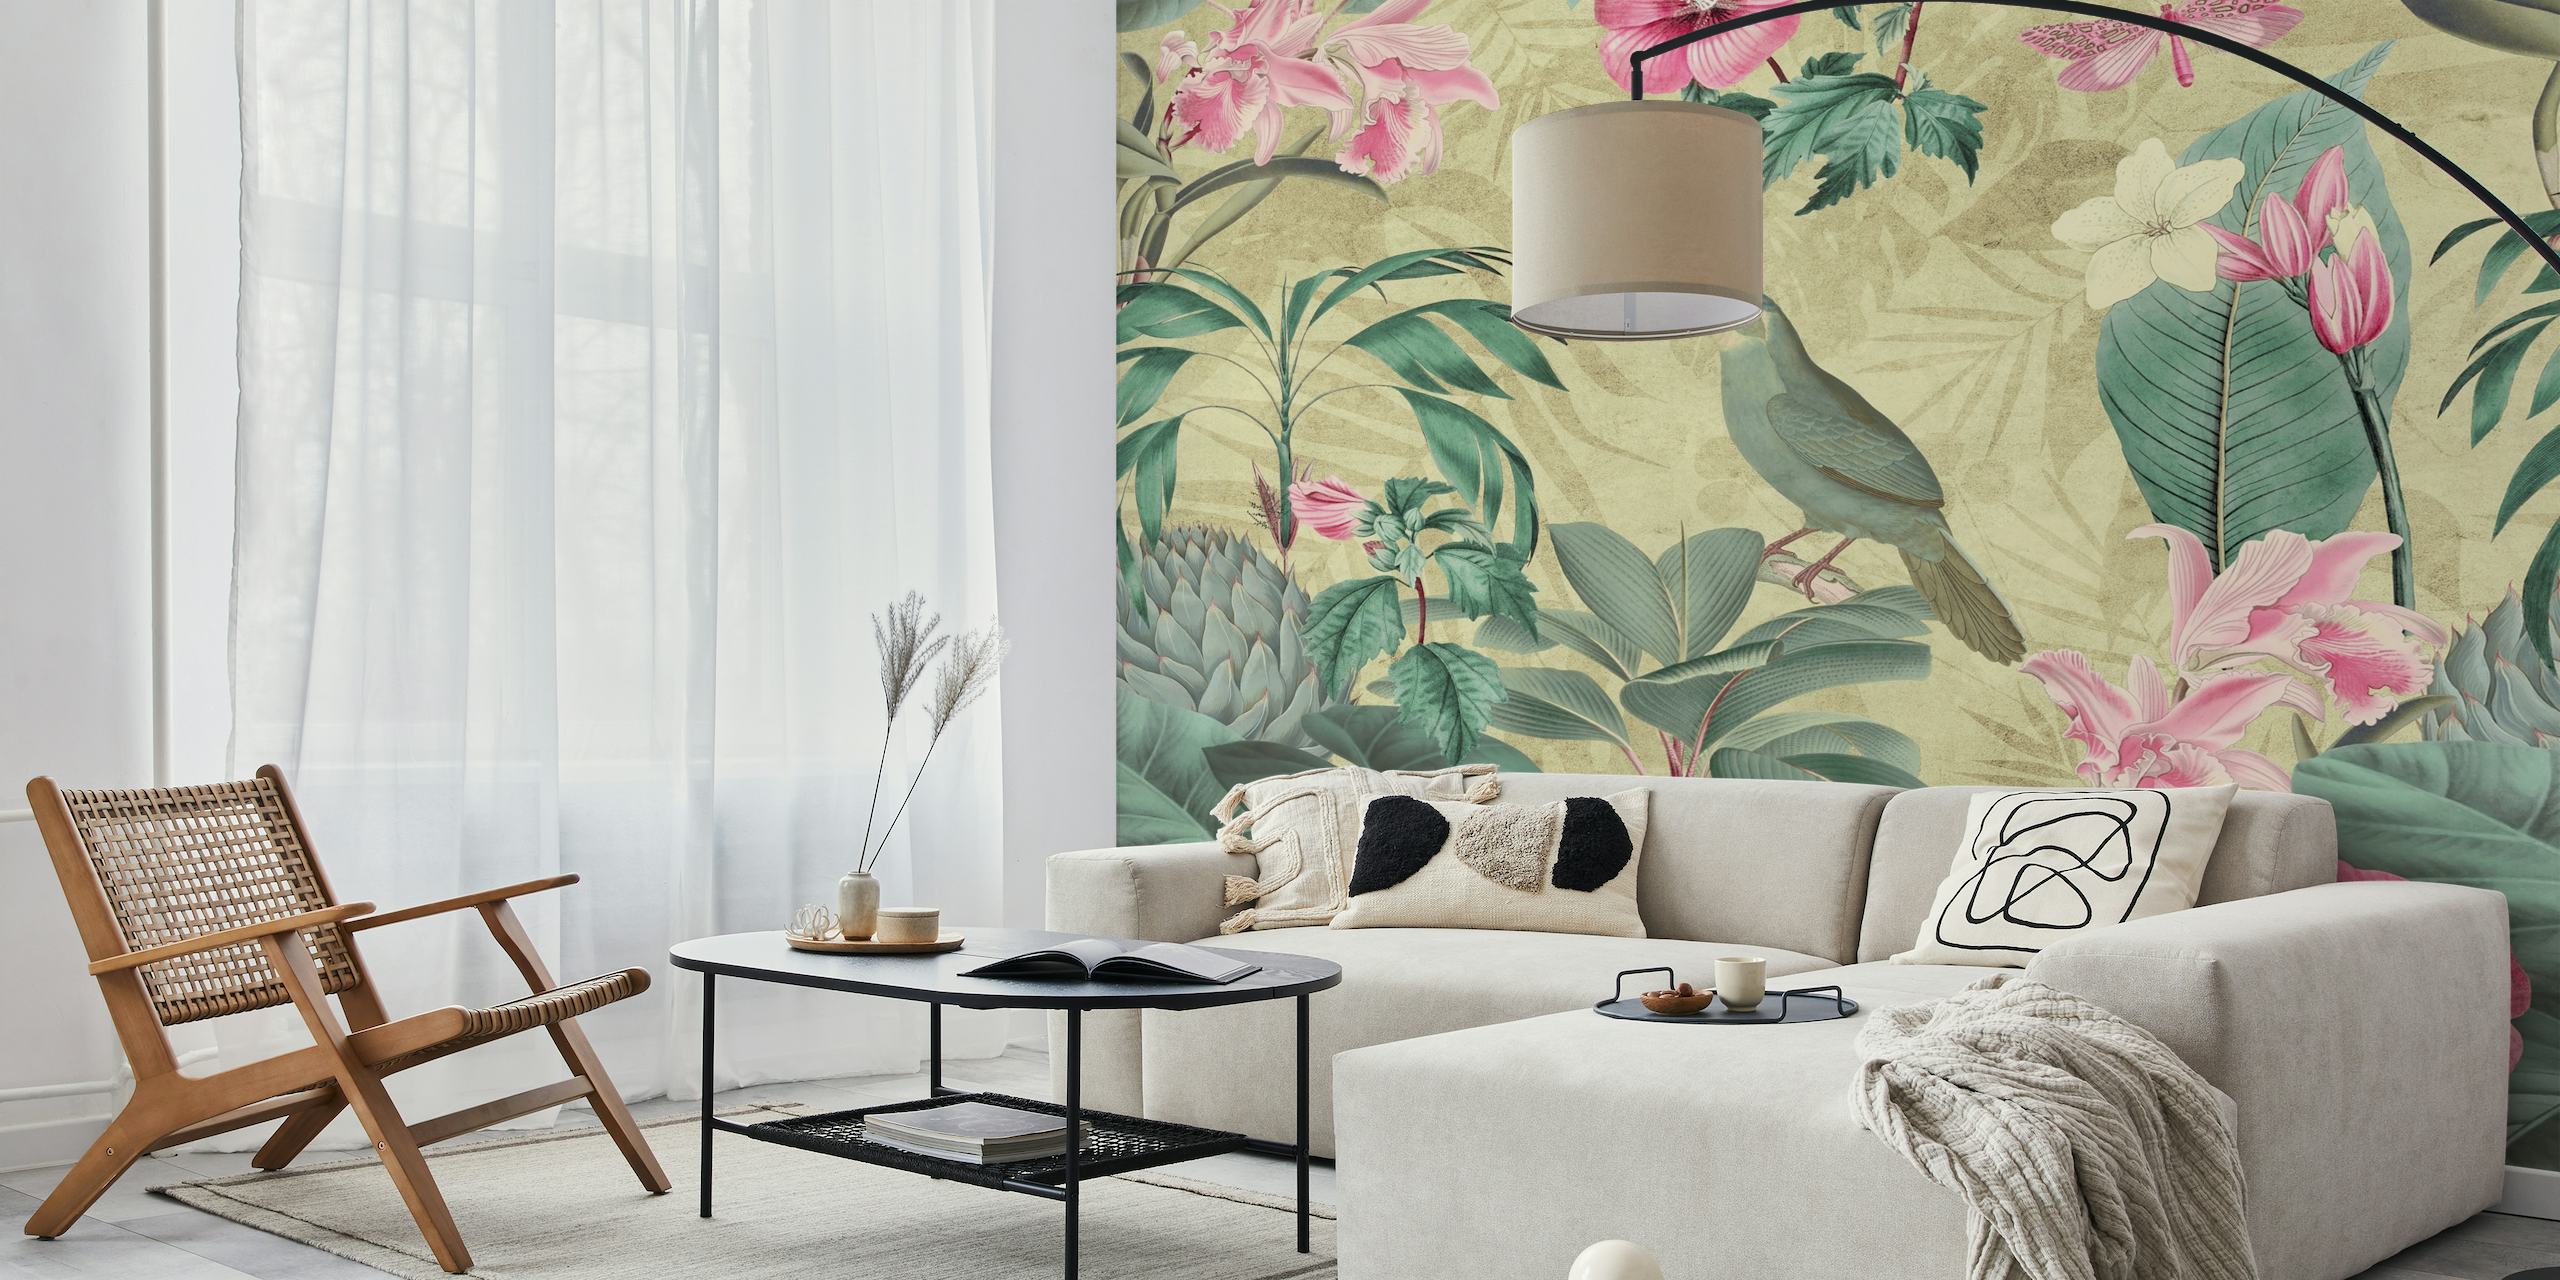 Exotic jungle-themed wall mural with birds and pink flowers on Happywall.